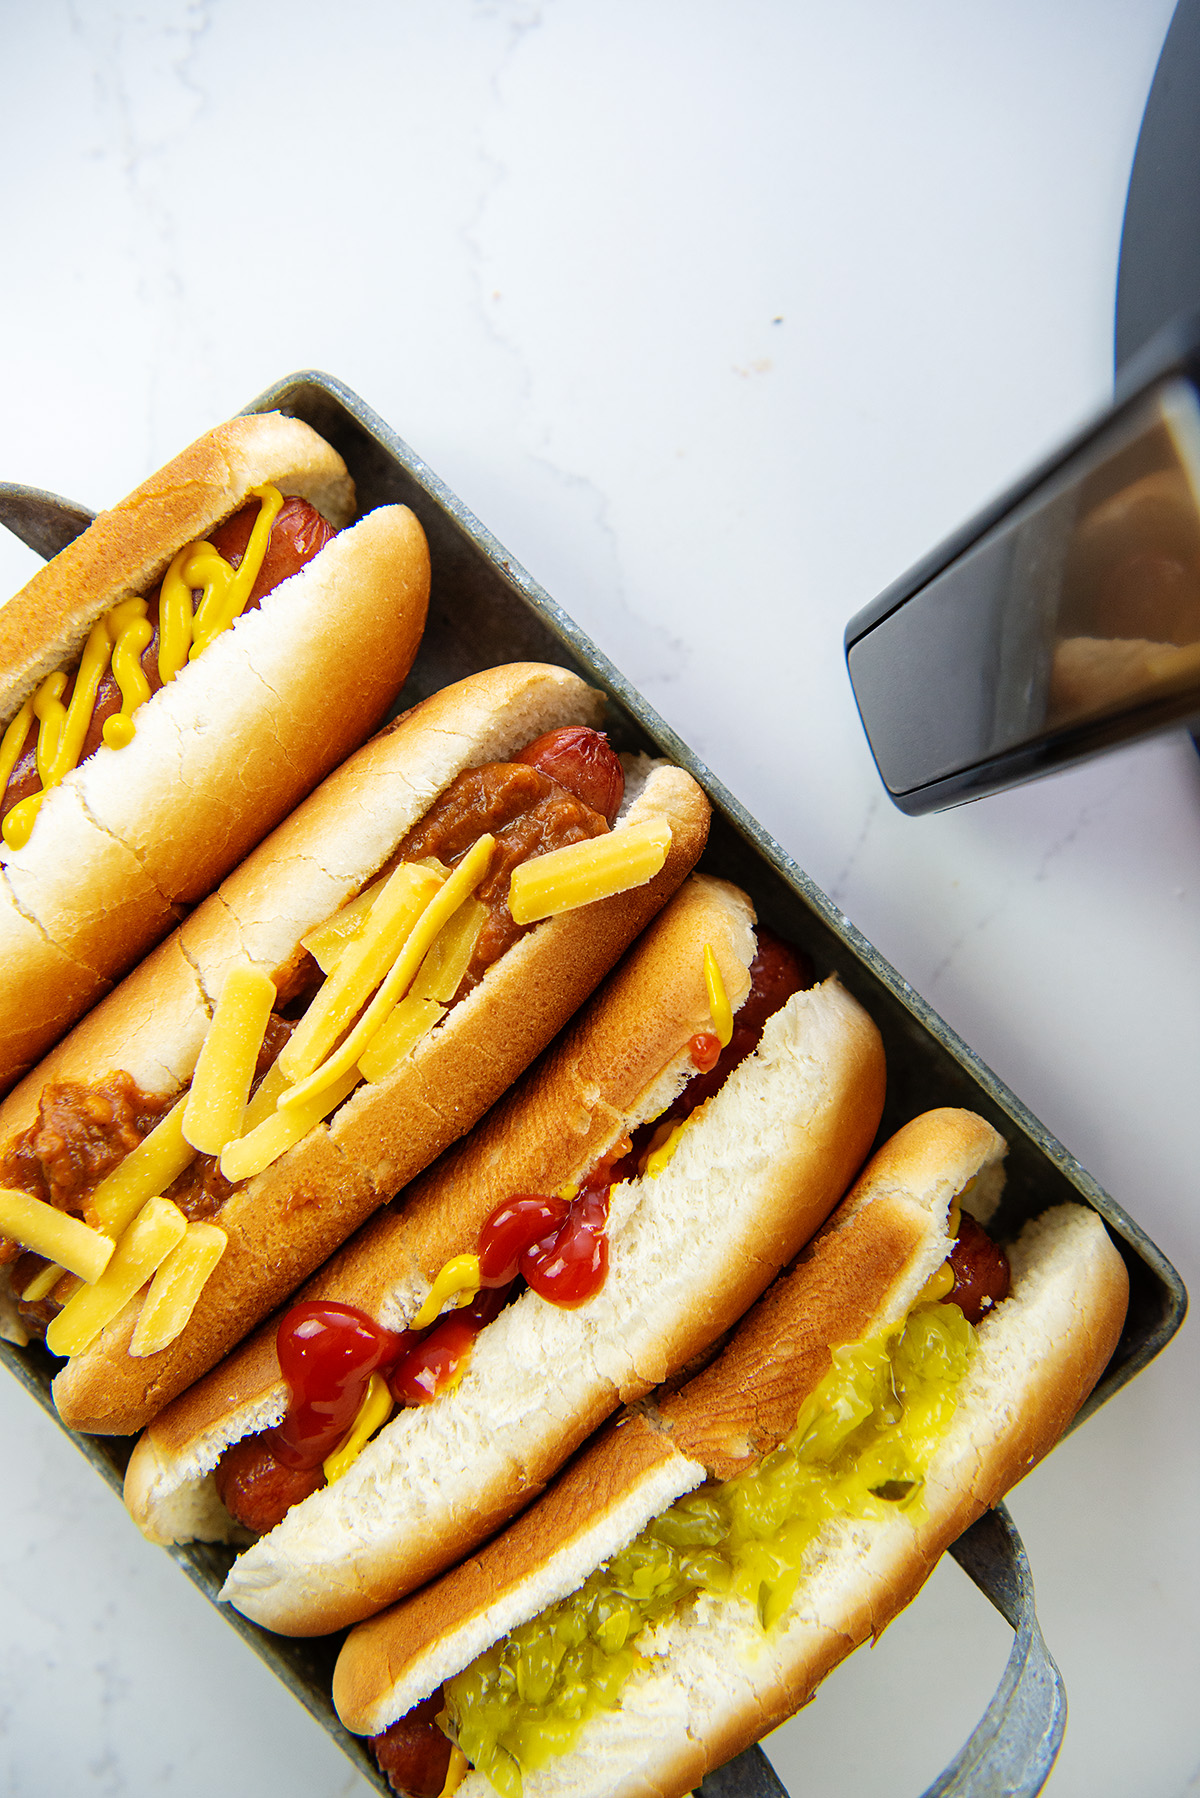 A close up of four hot dogs with various condiments on them in a serving tray